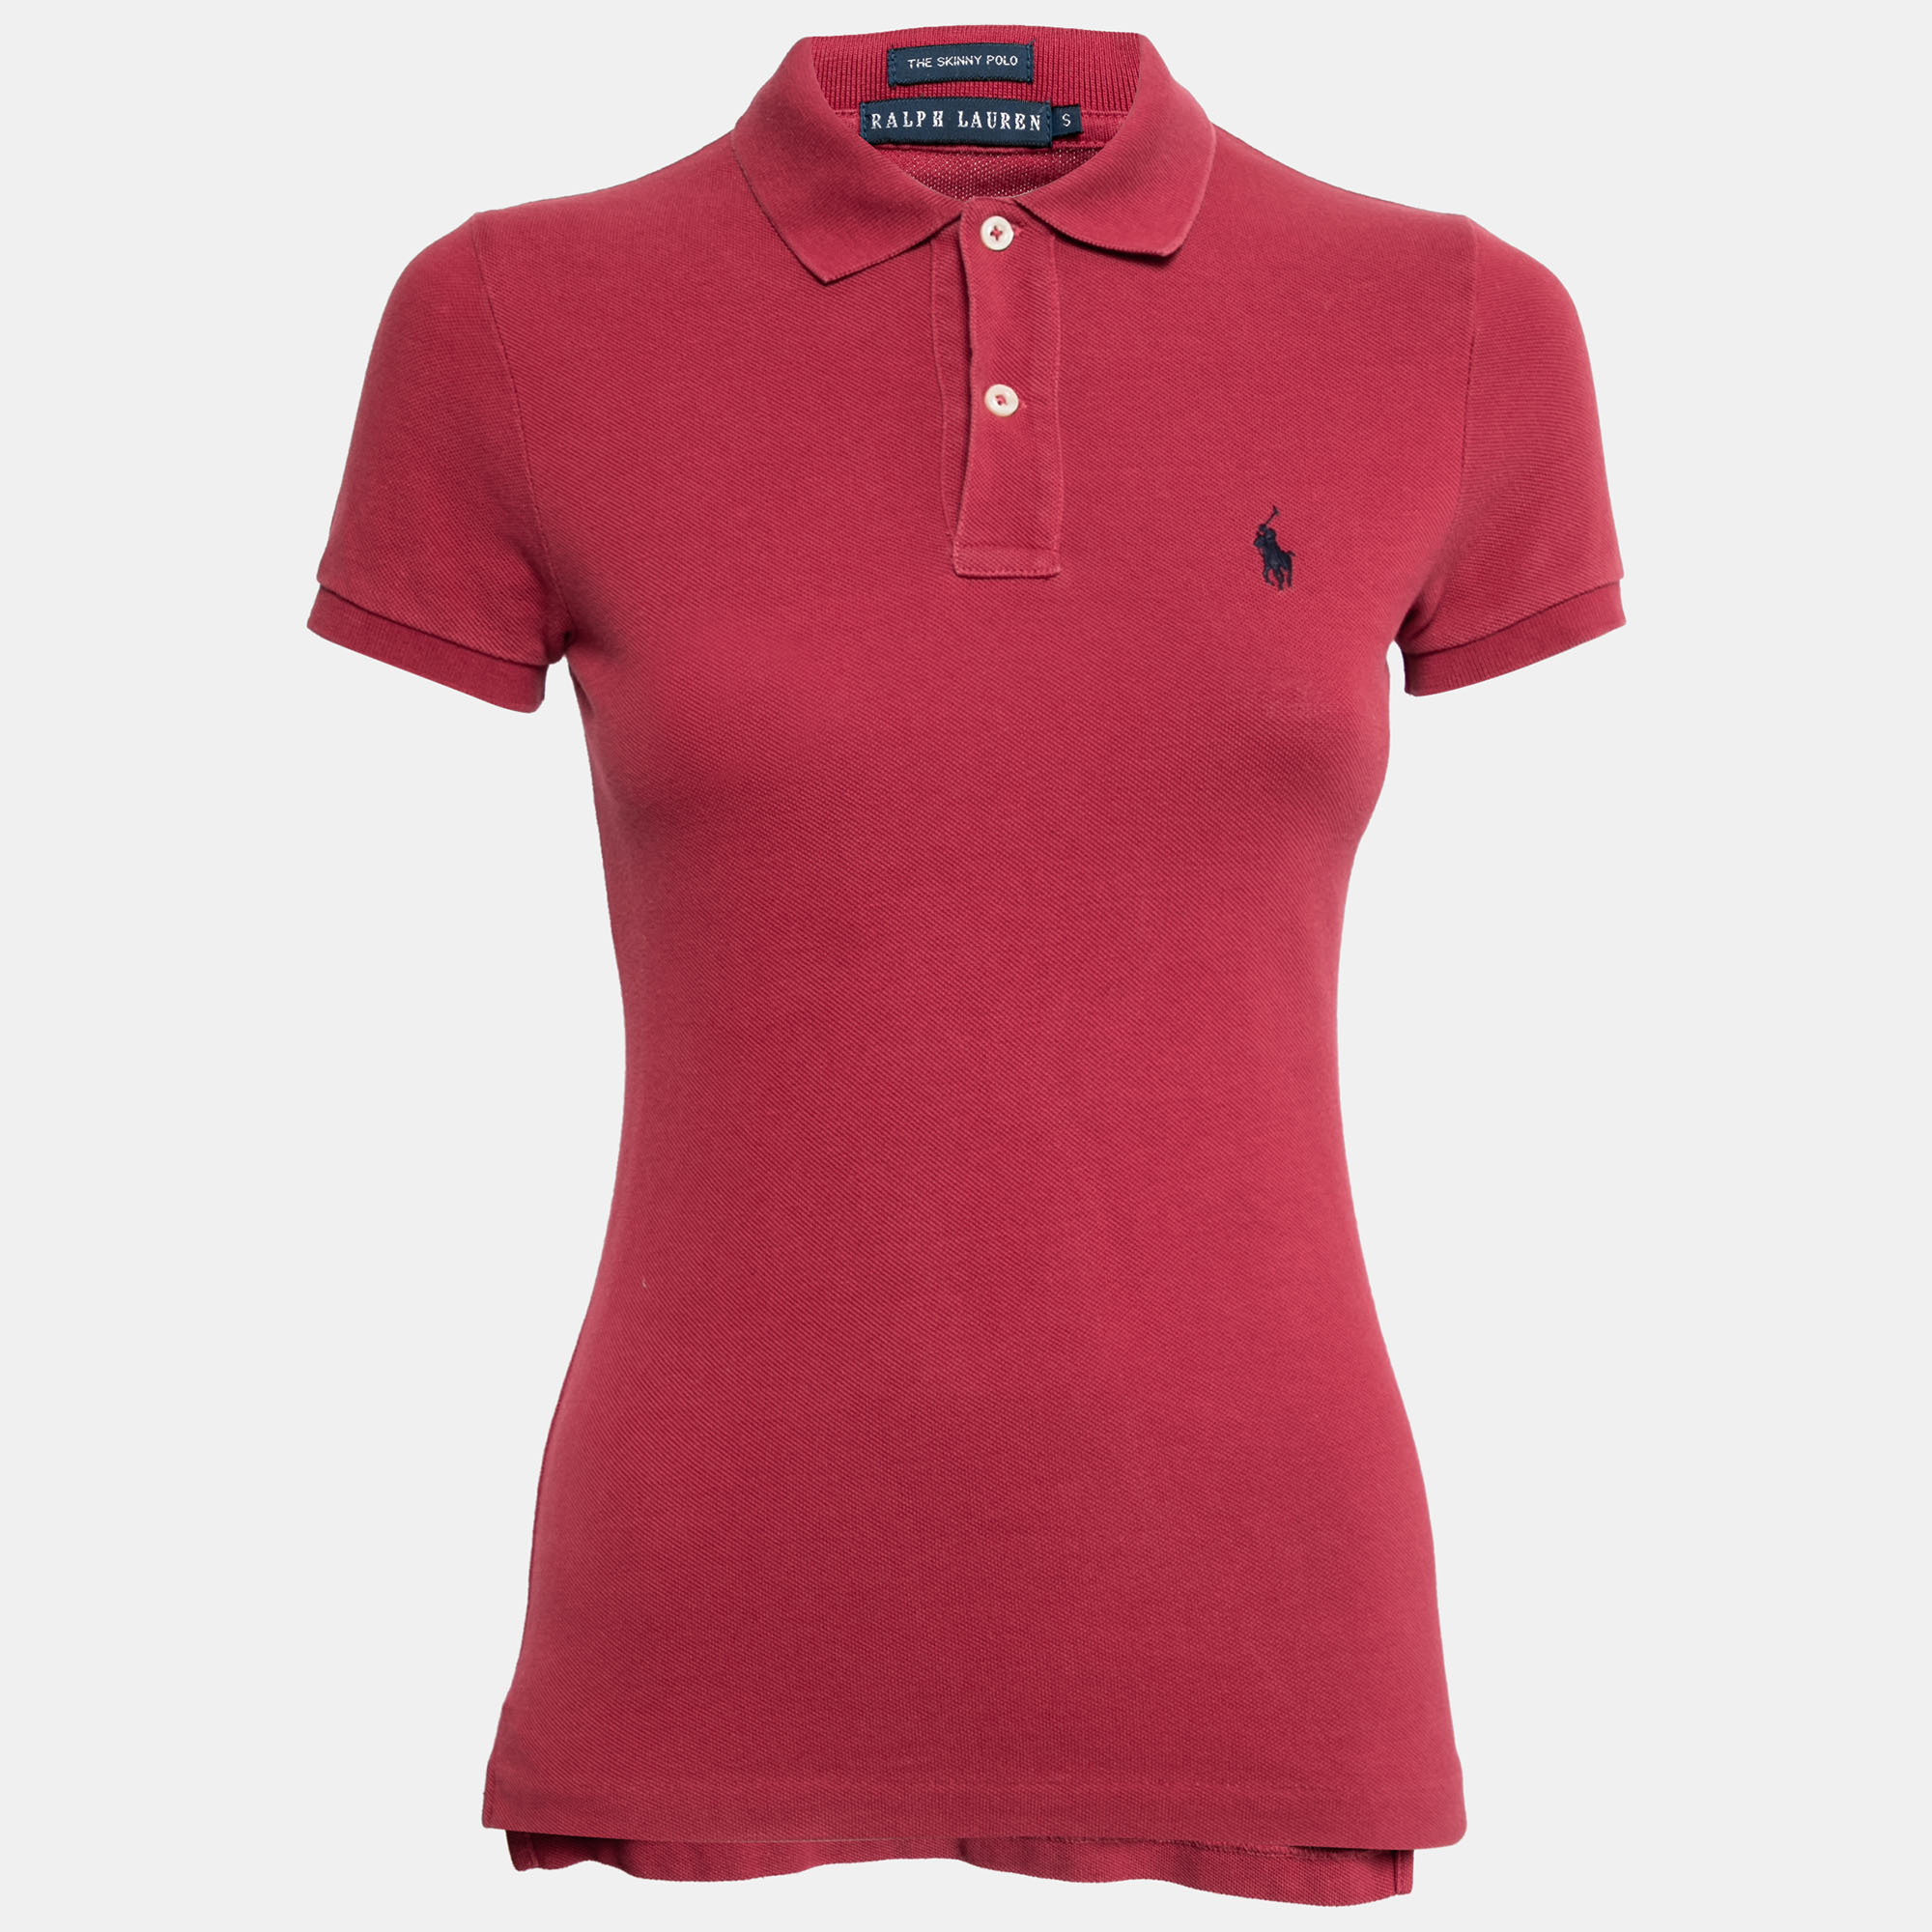 Ralph Laurens polo t shirts have always been a classic pick for women. This iteration is tailored using cotton piqué in a red hue and finished off with the iconic logo and a buttoned placket. Complete your casual look with a pair of shorts and sneakers.